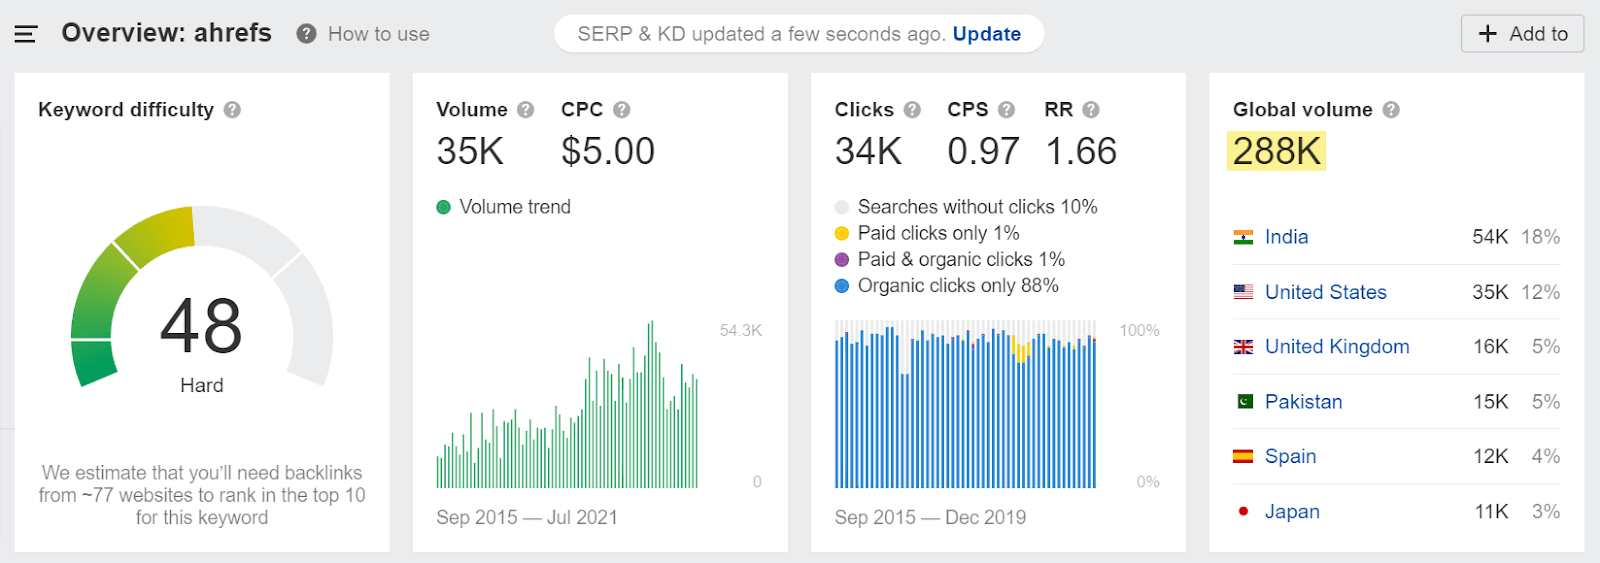 Overview showing there are 288k monthly searches globally for "ahrefs"